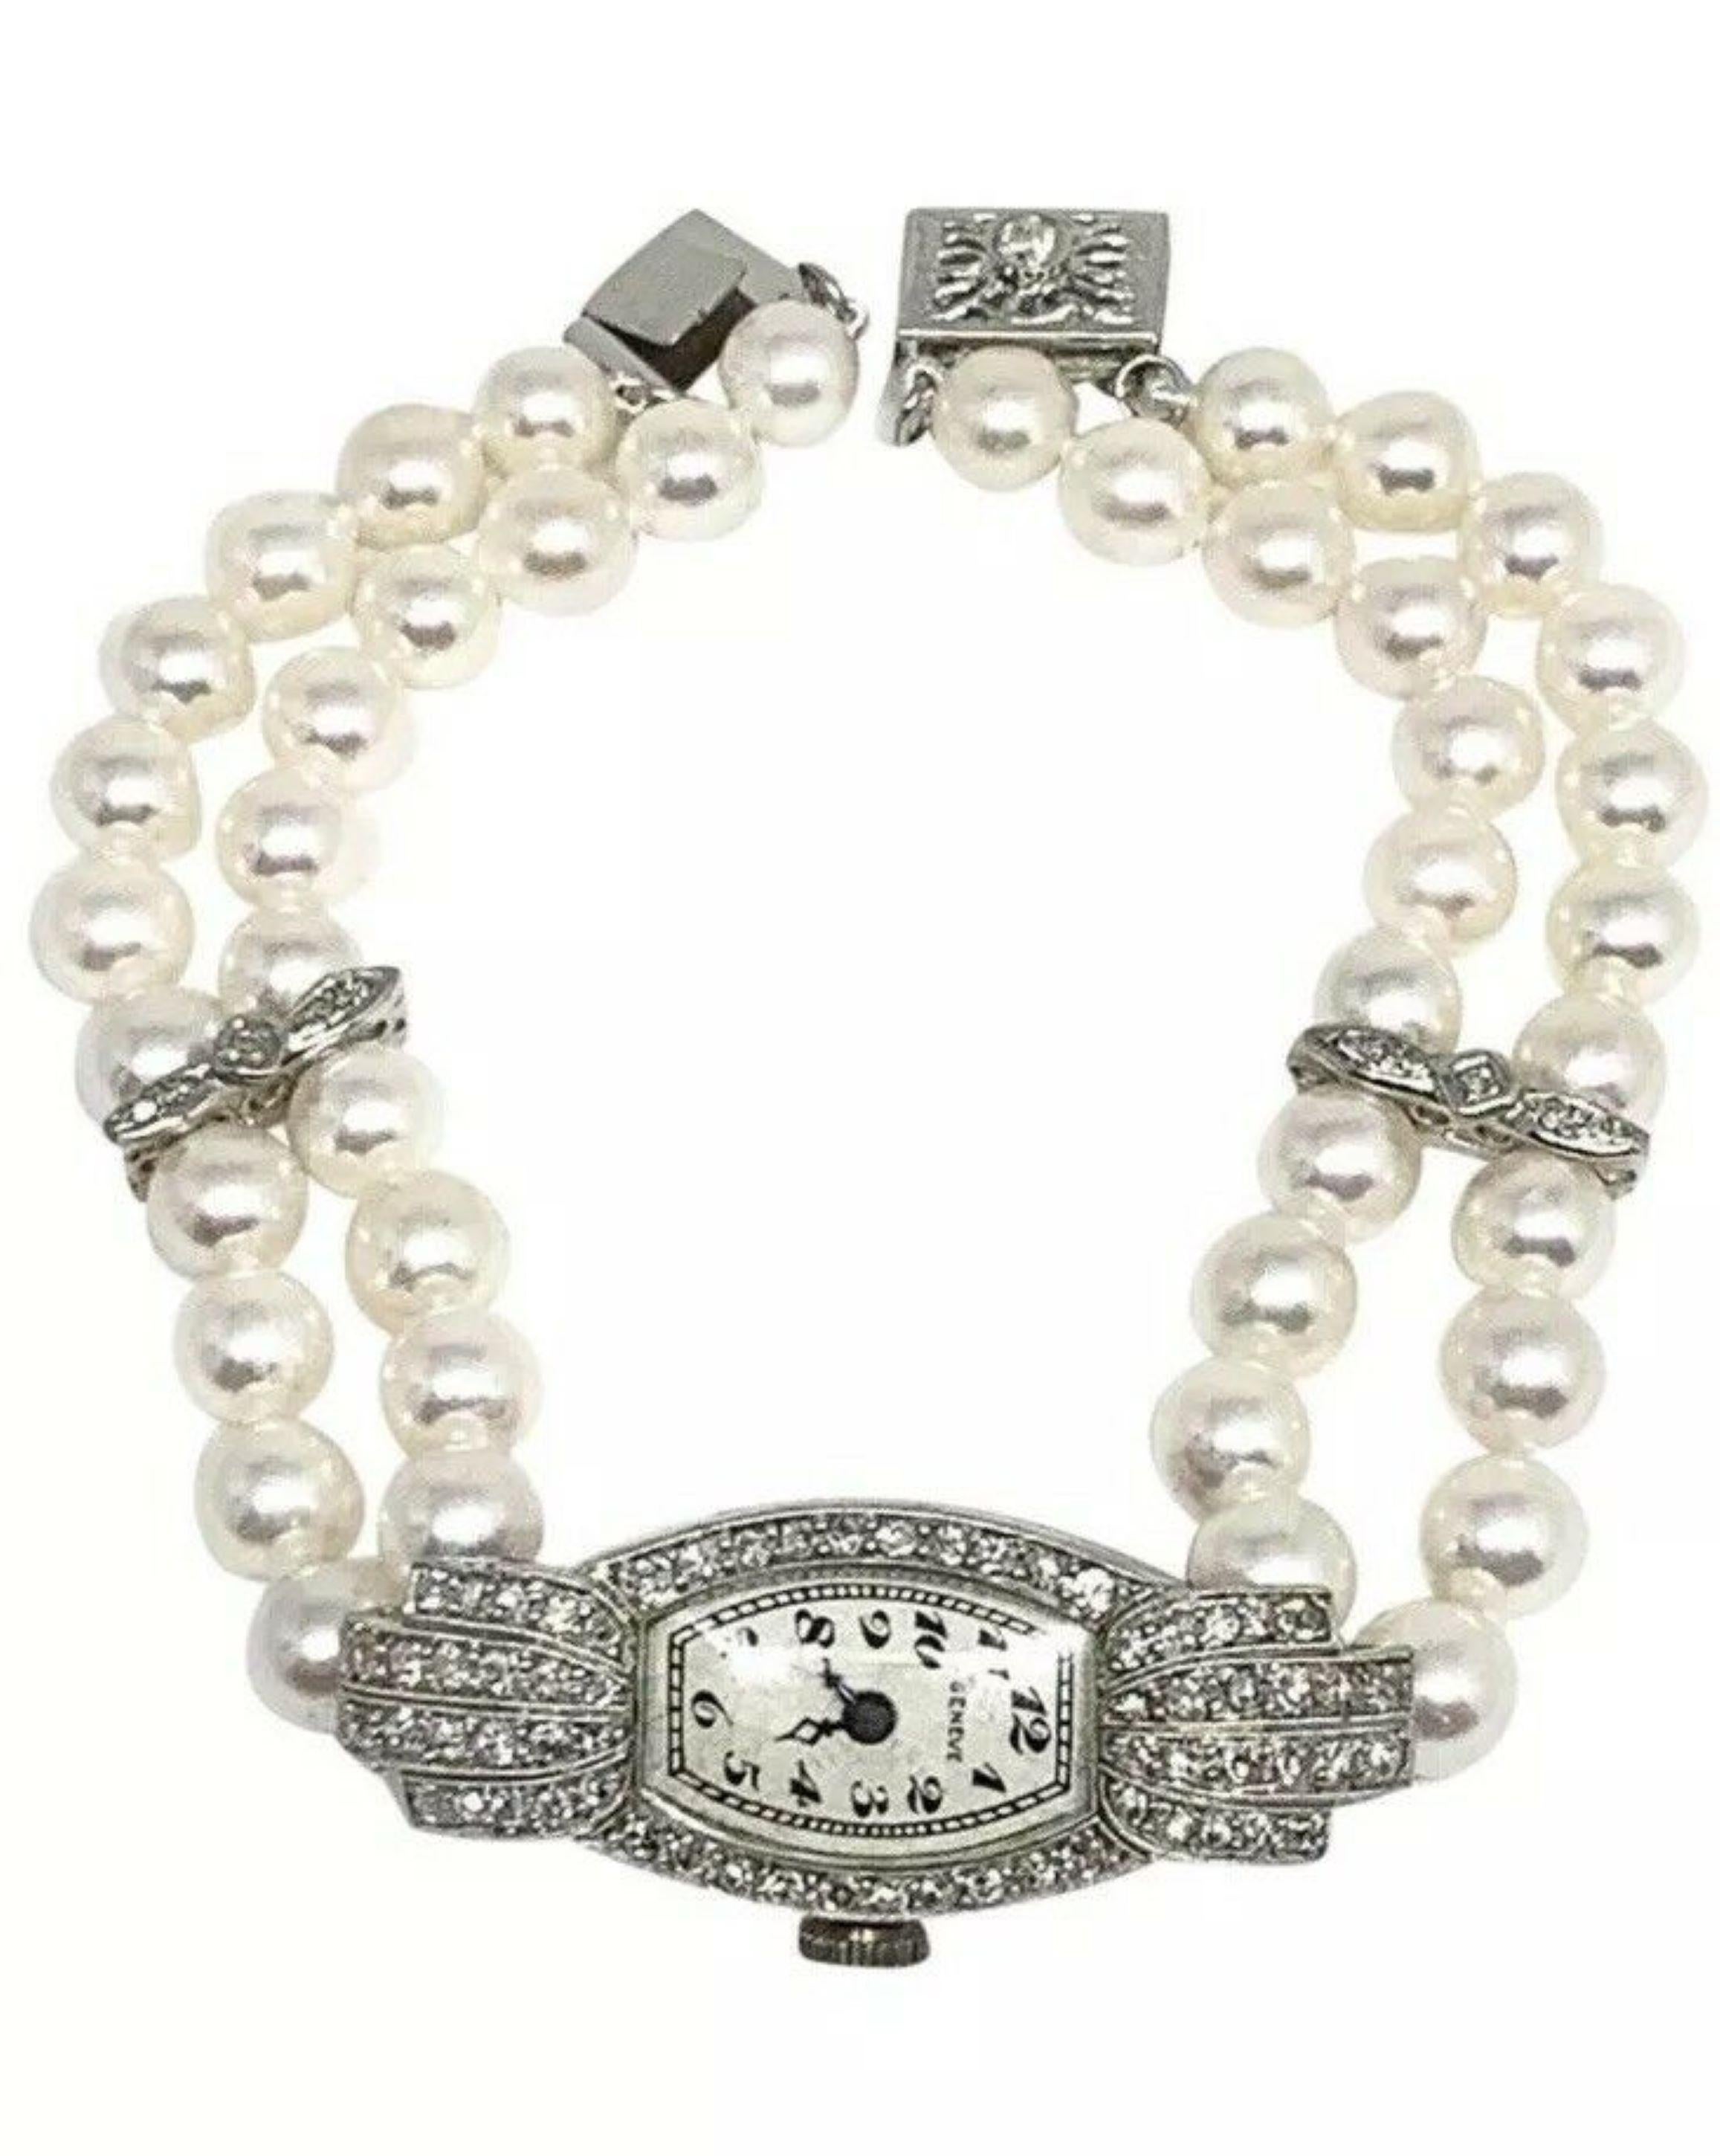 CERTIFIED GENEVA ESTATE 6.10-5.50 MM LARGE AKOYA PEARL WATCH BRACELET WITH A LENGTH OF 7.25 INCHES WITH THE CASE MADE OF PLATINUM AND THE BUCKLE 14 KT GOLD
THE HIGH LUSTER QUALITY AKOYA PEARLS AND CLASP ARE BRAND NEW AND WERE CUSTOM MADE FOR THIS